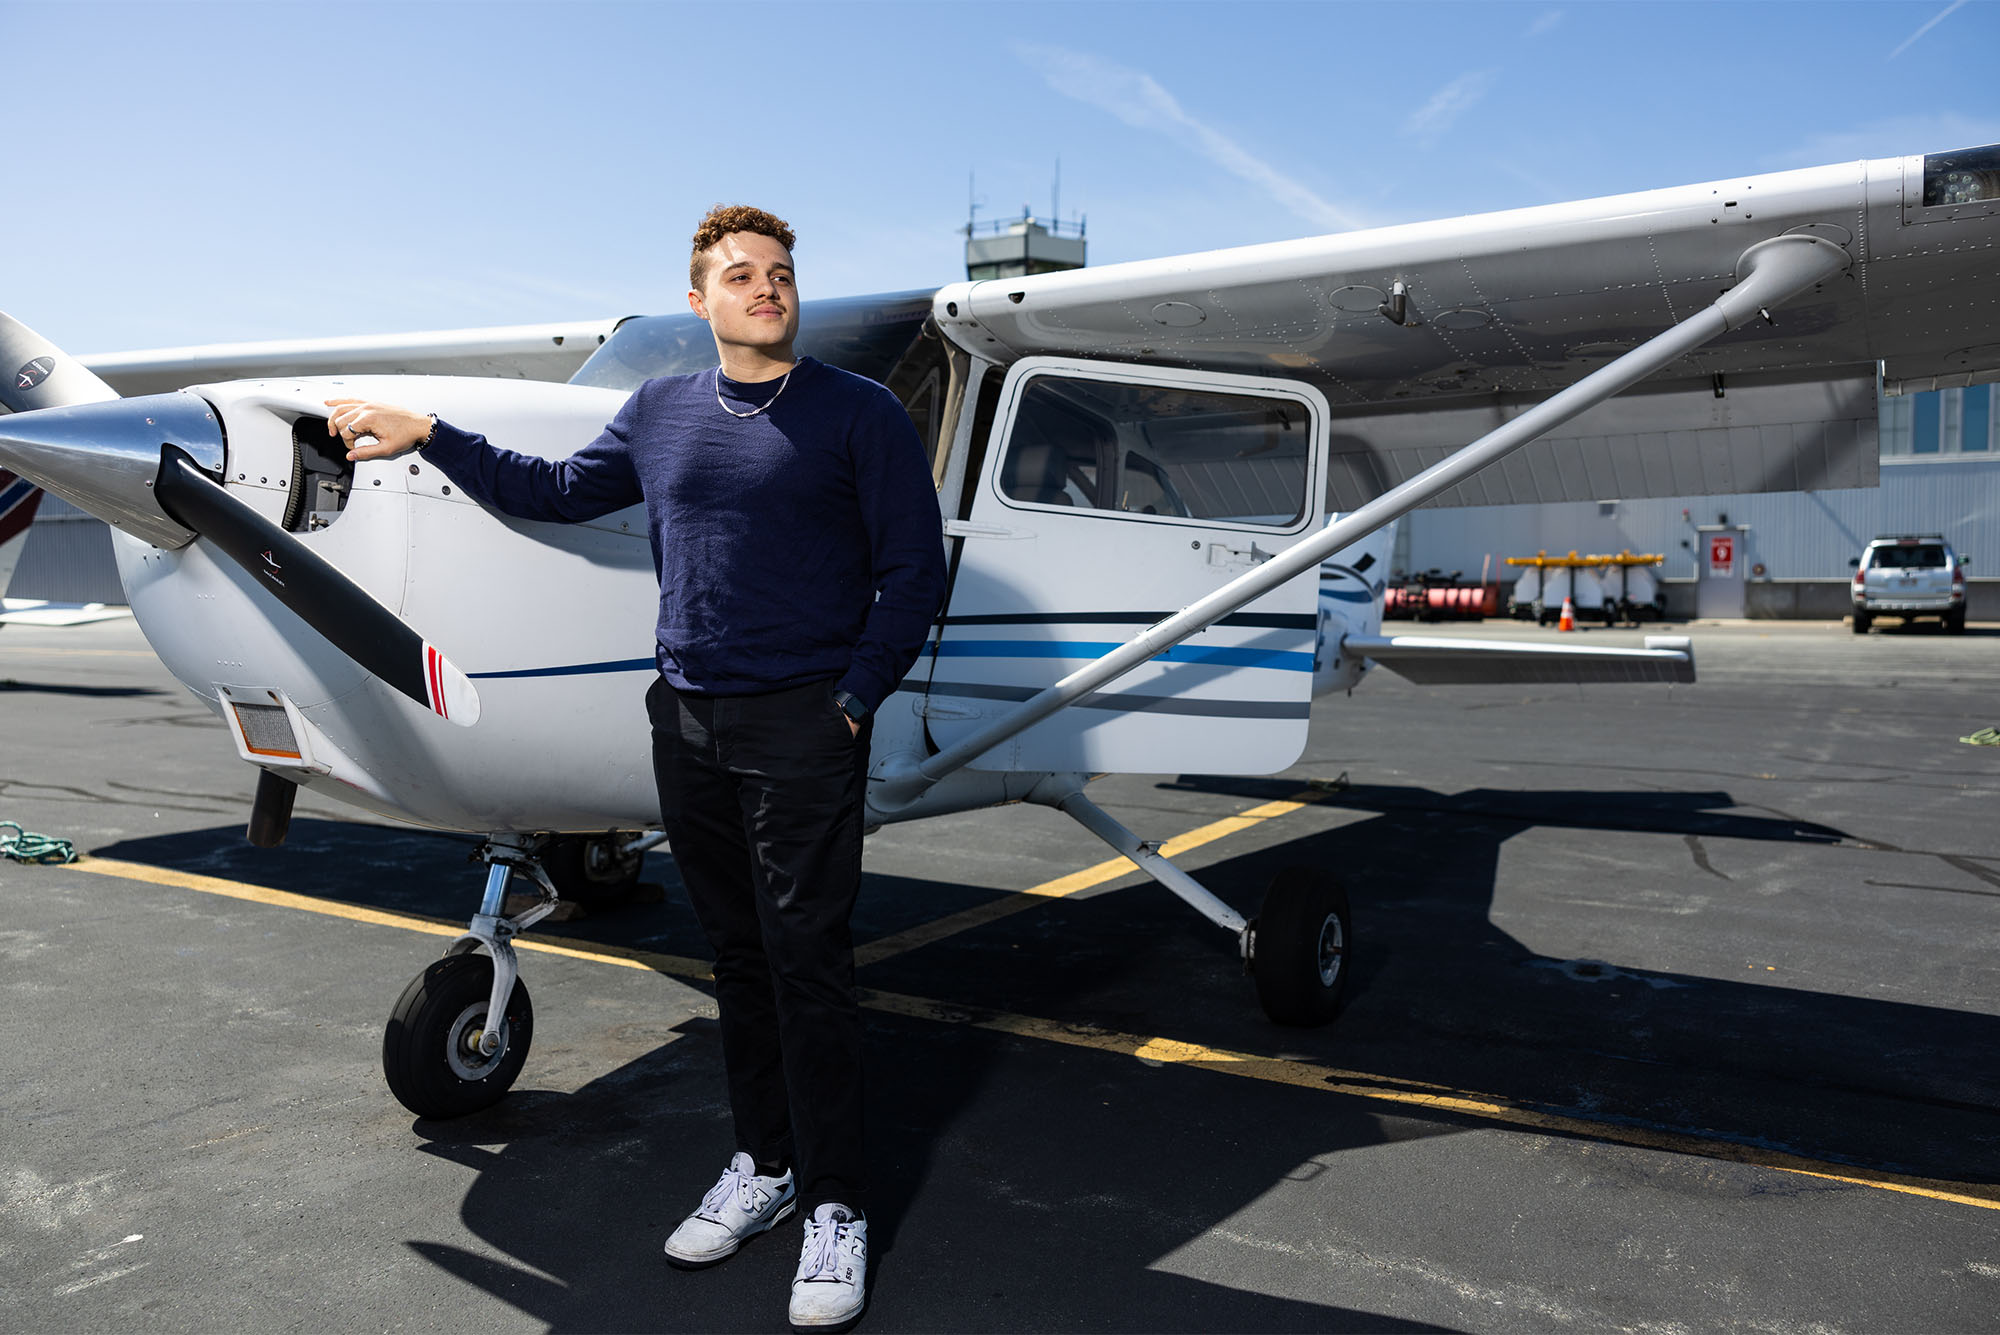 Photo: A young man standing in front of a small Cessna plane